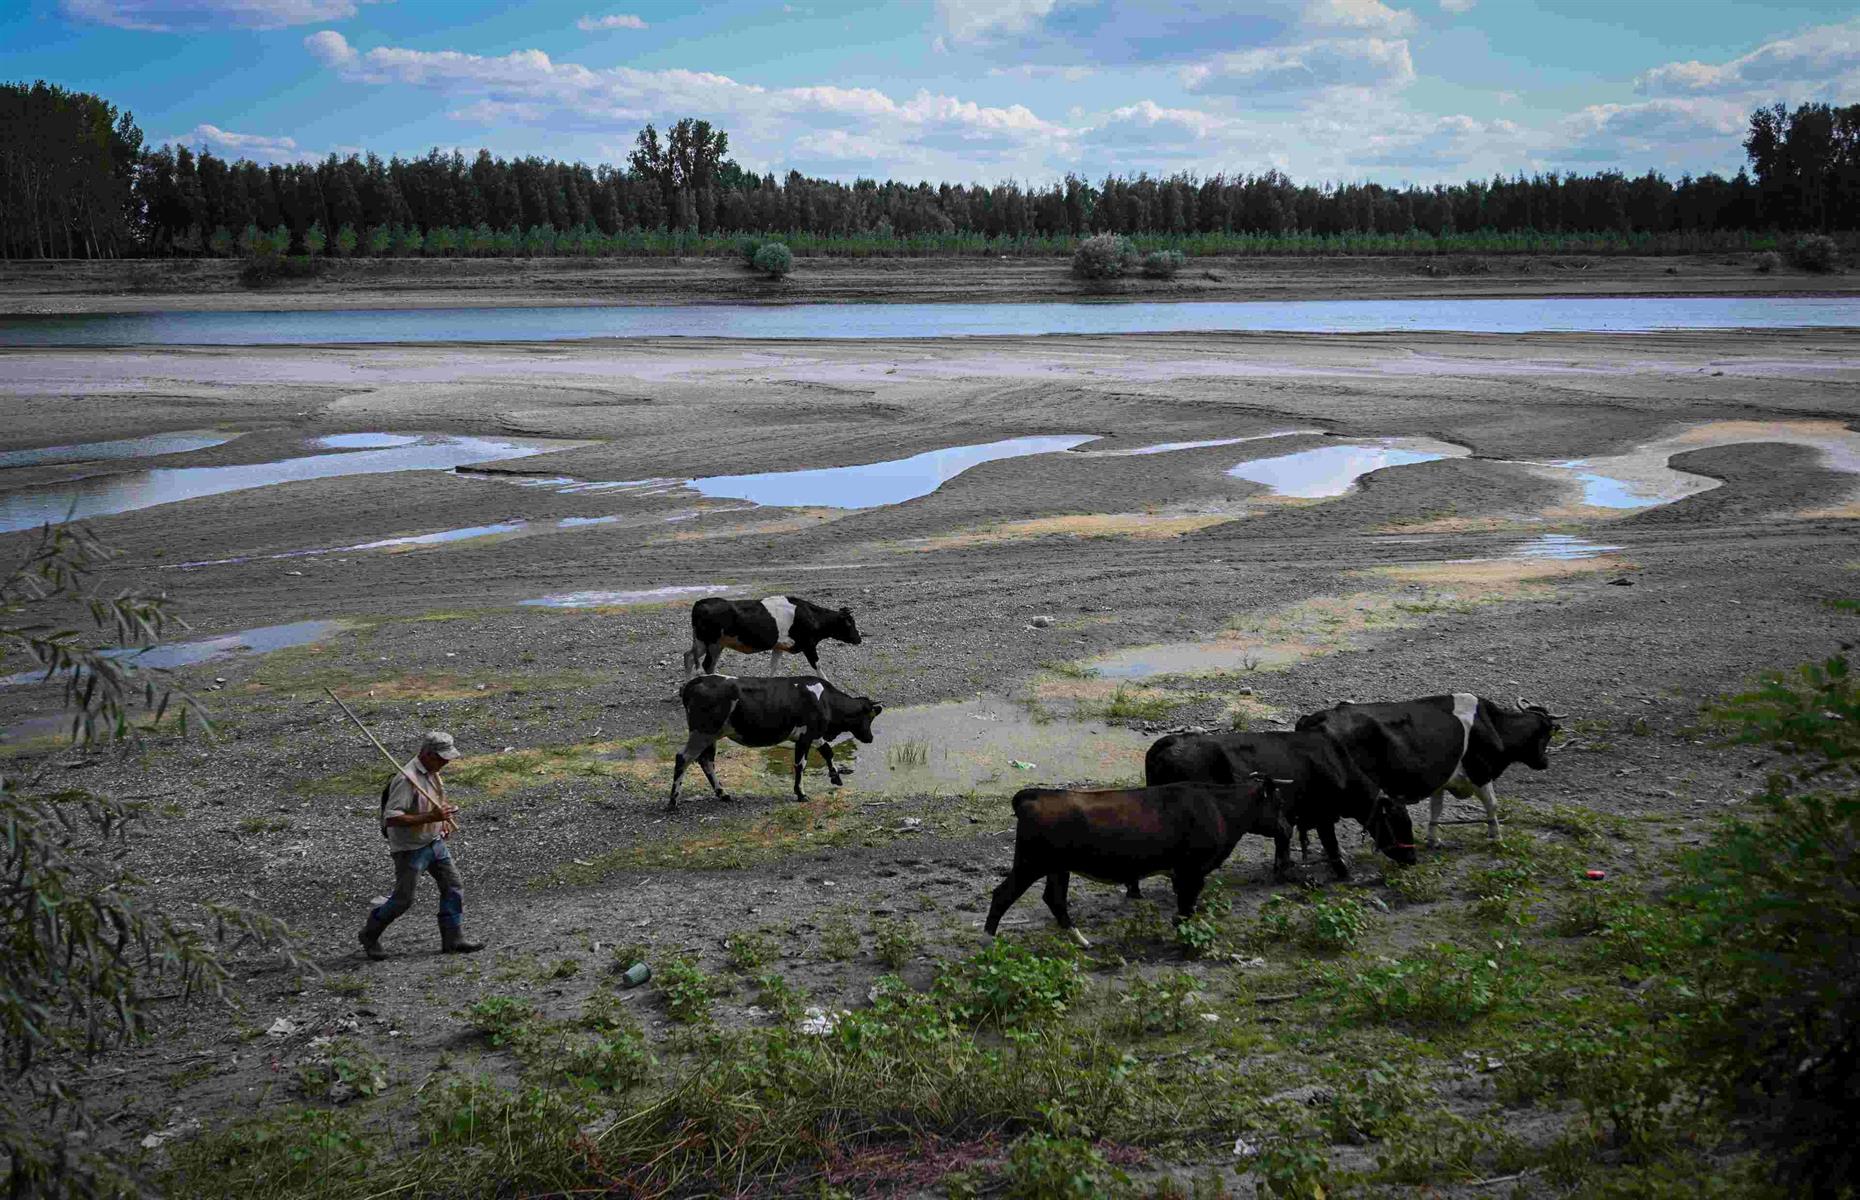 <p>In the summer of 2022, a five-month-long historic drought reduced many of Europe’s rivers to shadows of their usual selves, spiking record-breakingly low water levels. The Loire, Rhine, Po and Danube were among those worst affected, with the latter having to be dredged in parts of Serbia, Romania and Bulgaria to deepen its waters and ensure ships could safely navigate the passage. Flowing at less than half its typical summer volume, the state of the Danube was largely ascribed to the climate crisis. Here, a farmer walks his cattle across the river’s bare bed in Roseti, southern Romania, on 11 August 2022.</p>